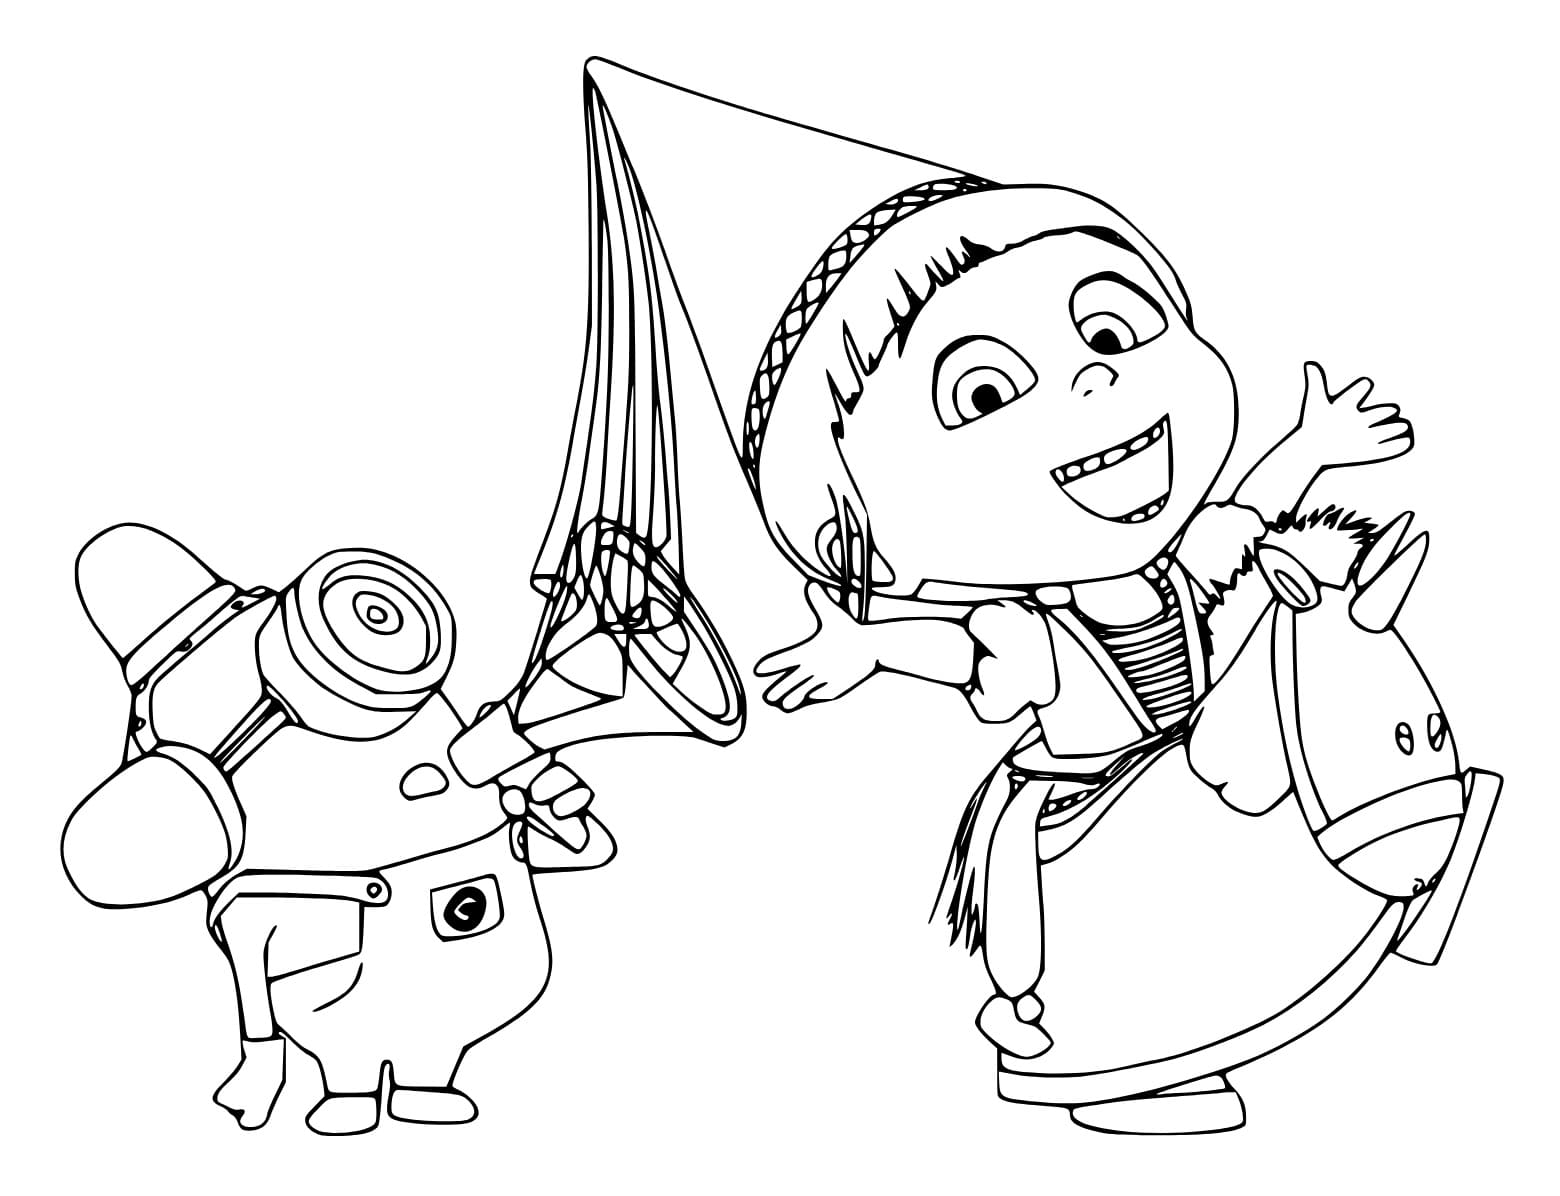 Minion and Agnes Gru coloring page - Download, Print or Color Online ...